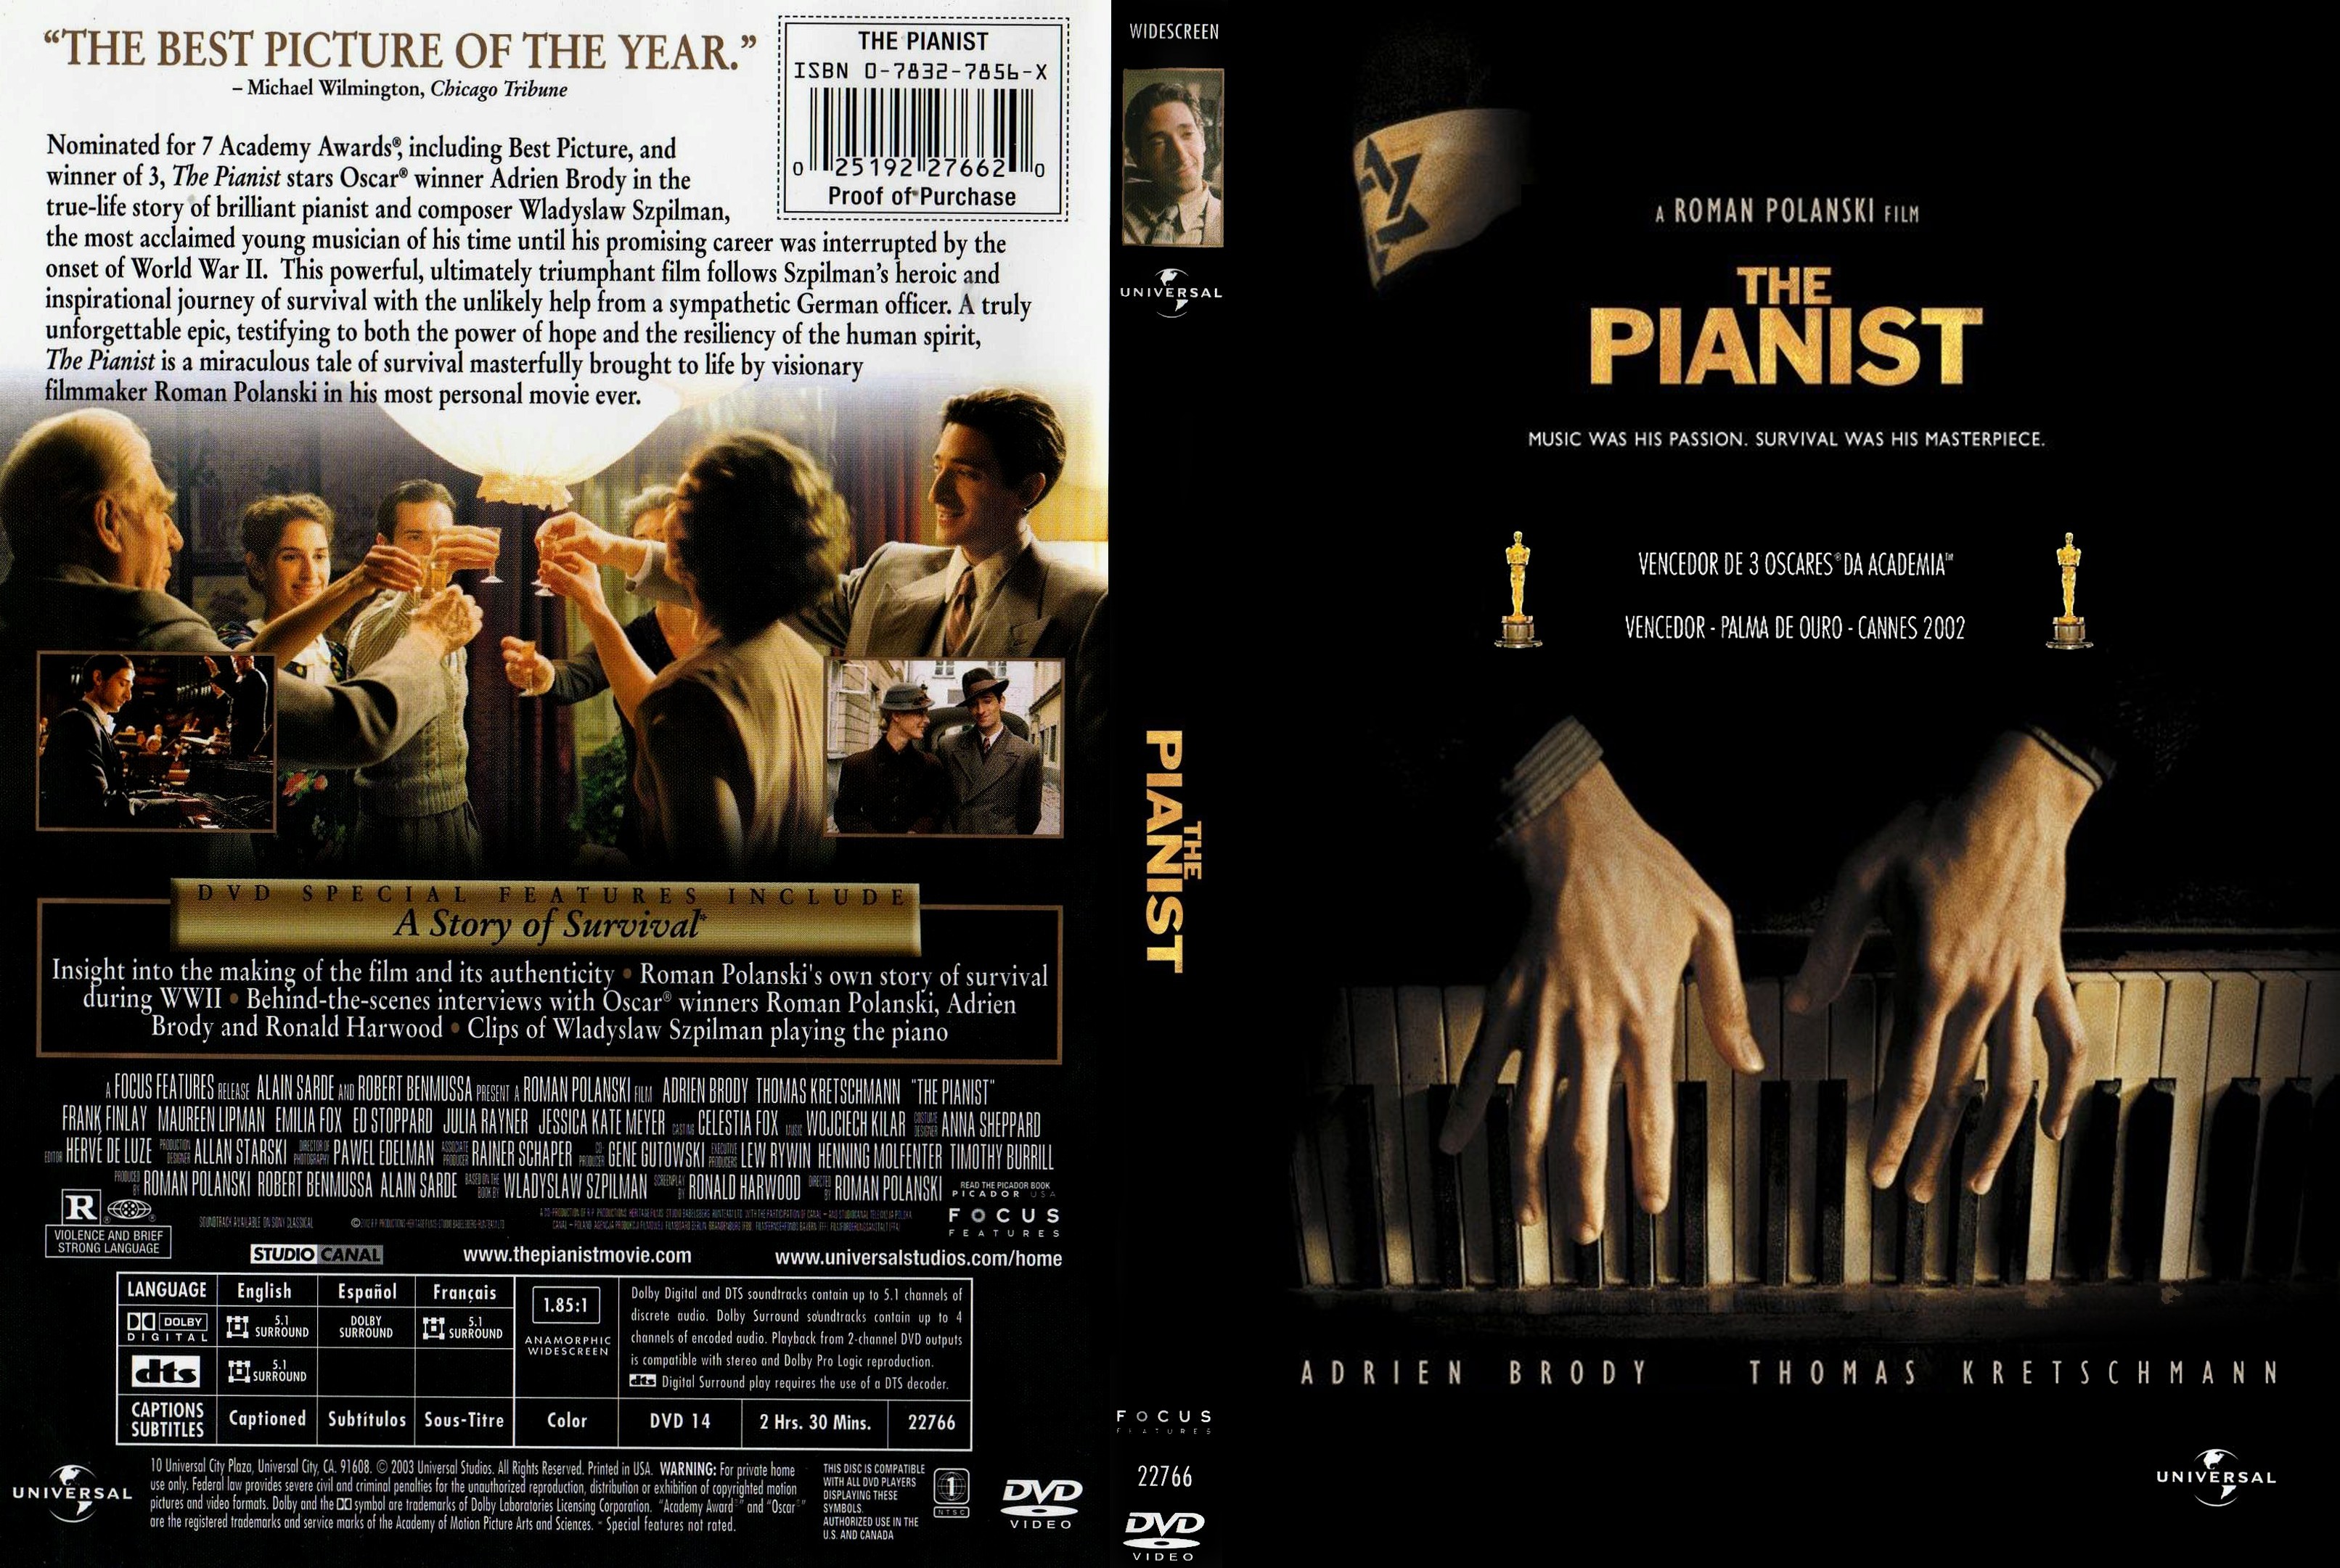 The pianist dvd torrent this is 40 subtitulado torrent